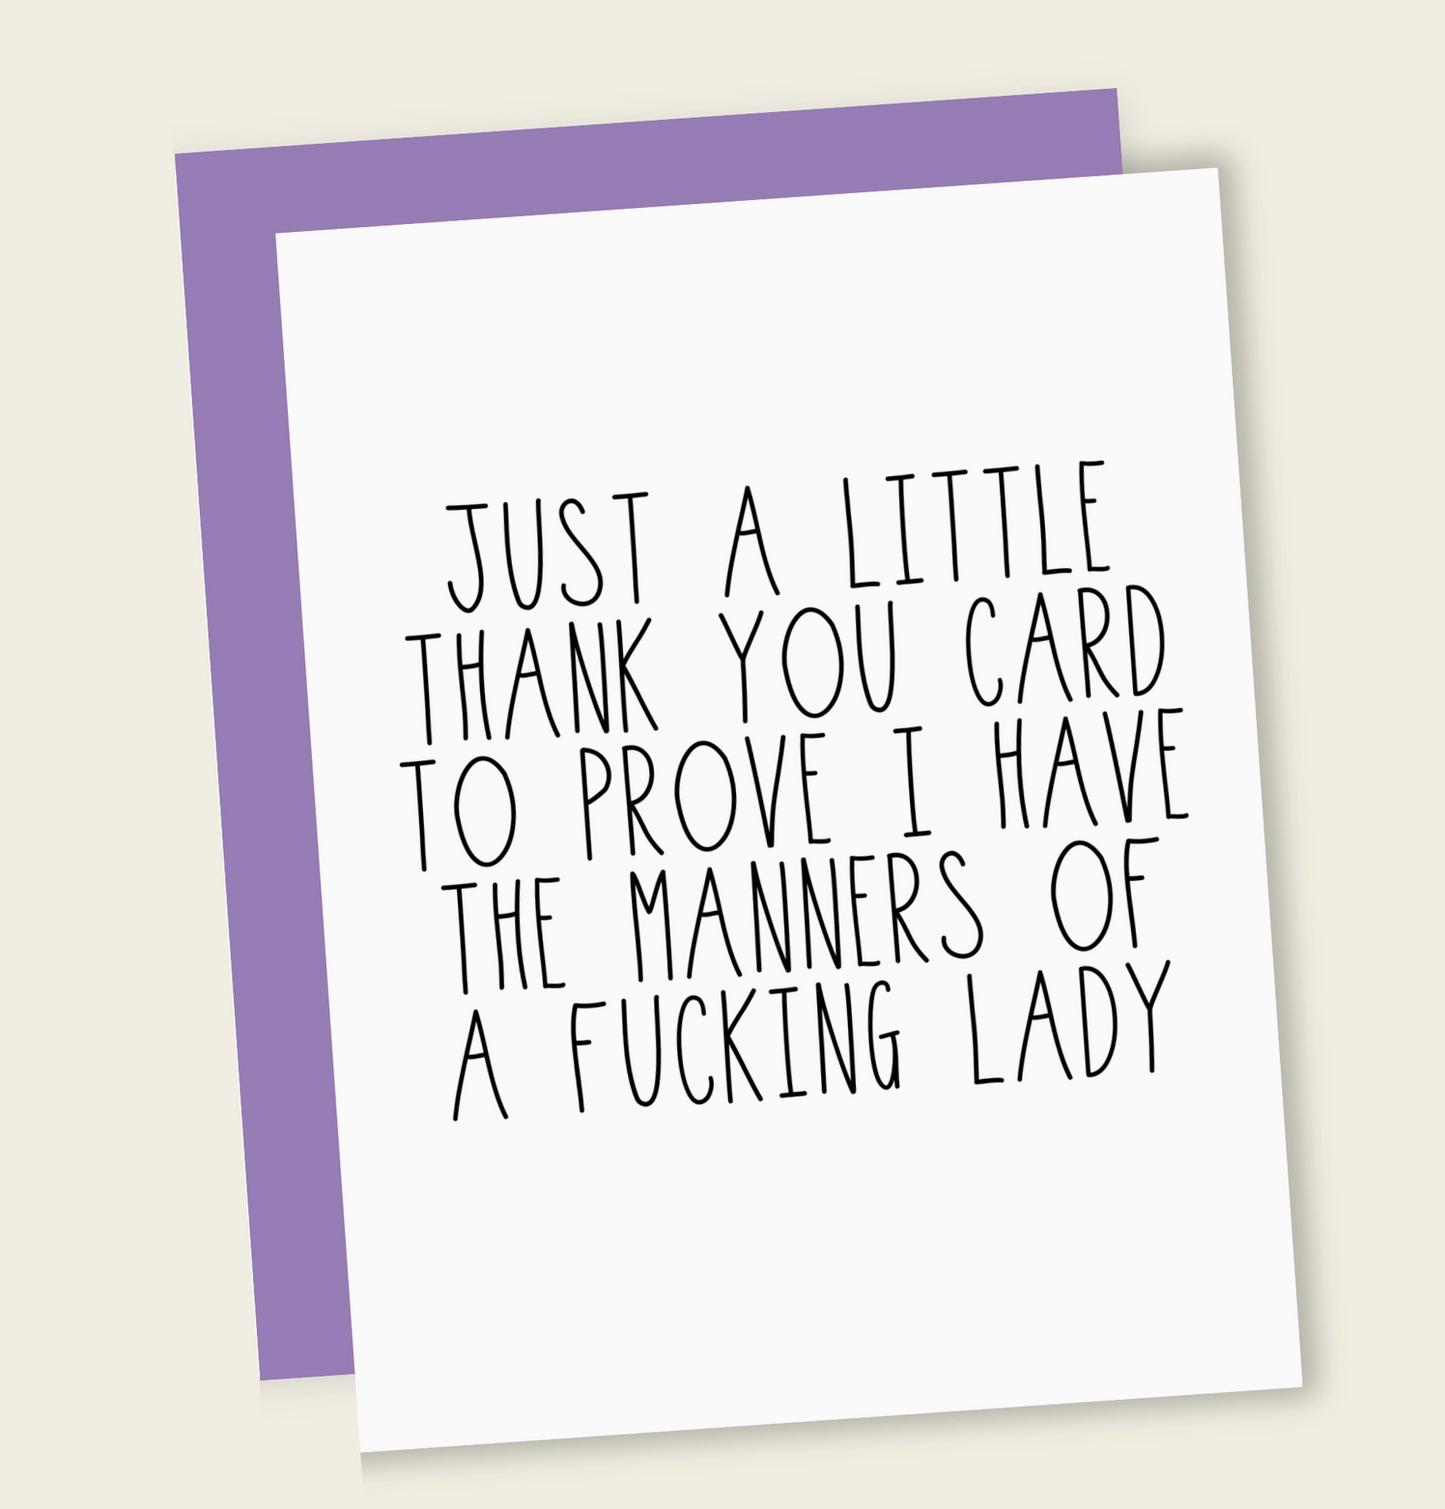 Just A Little Thank You Card To Prove I Have The Manners Of A F*cking Lady Card